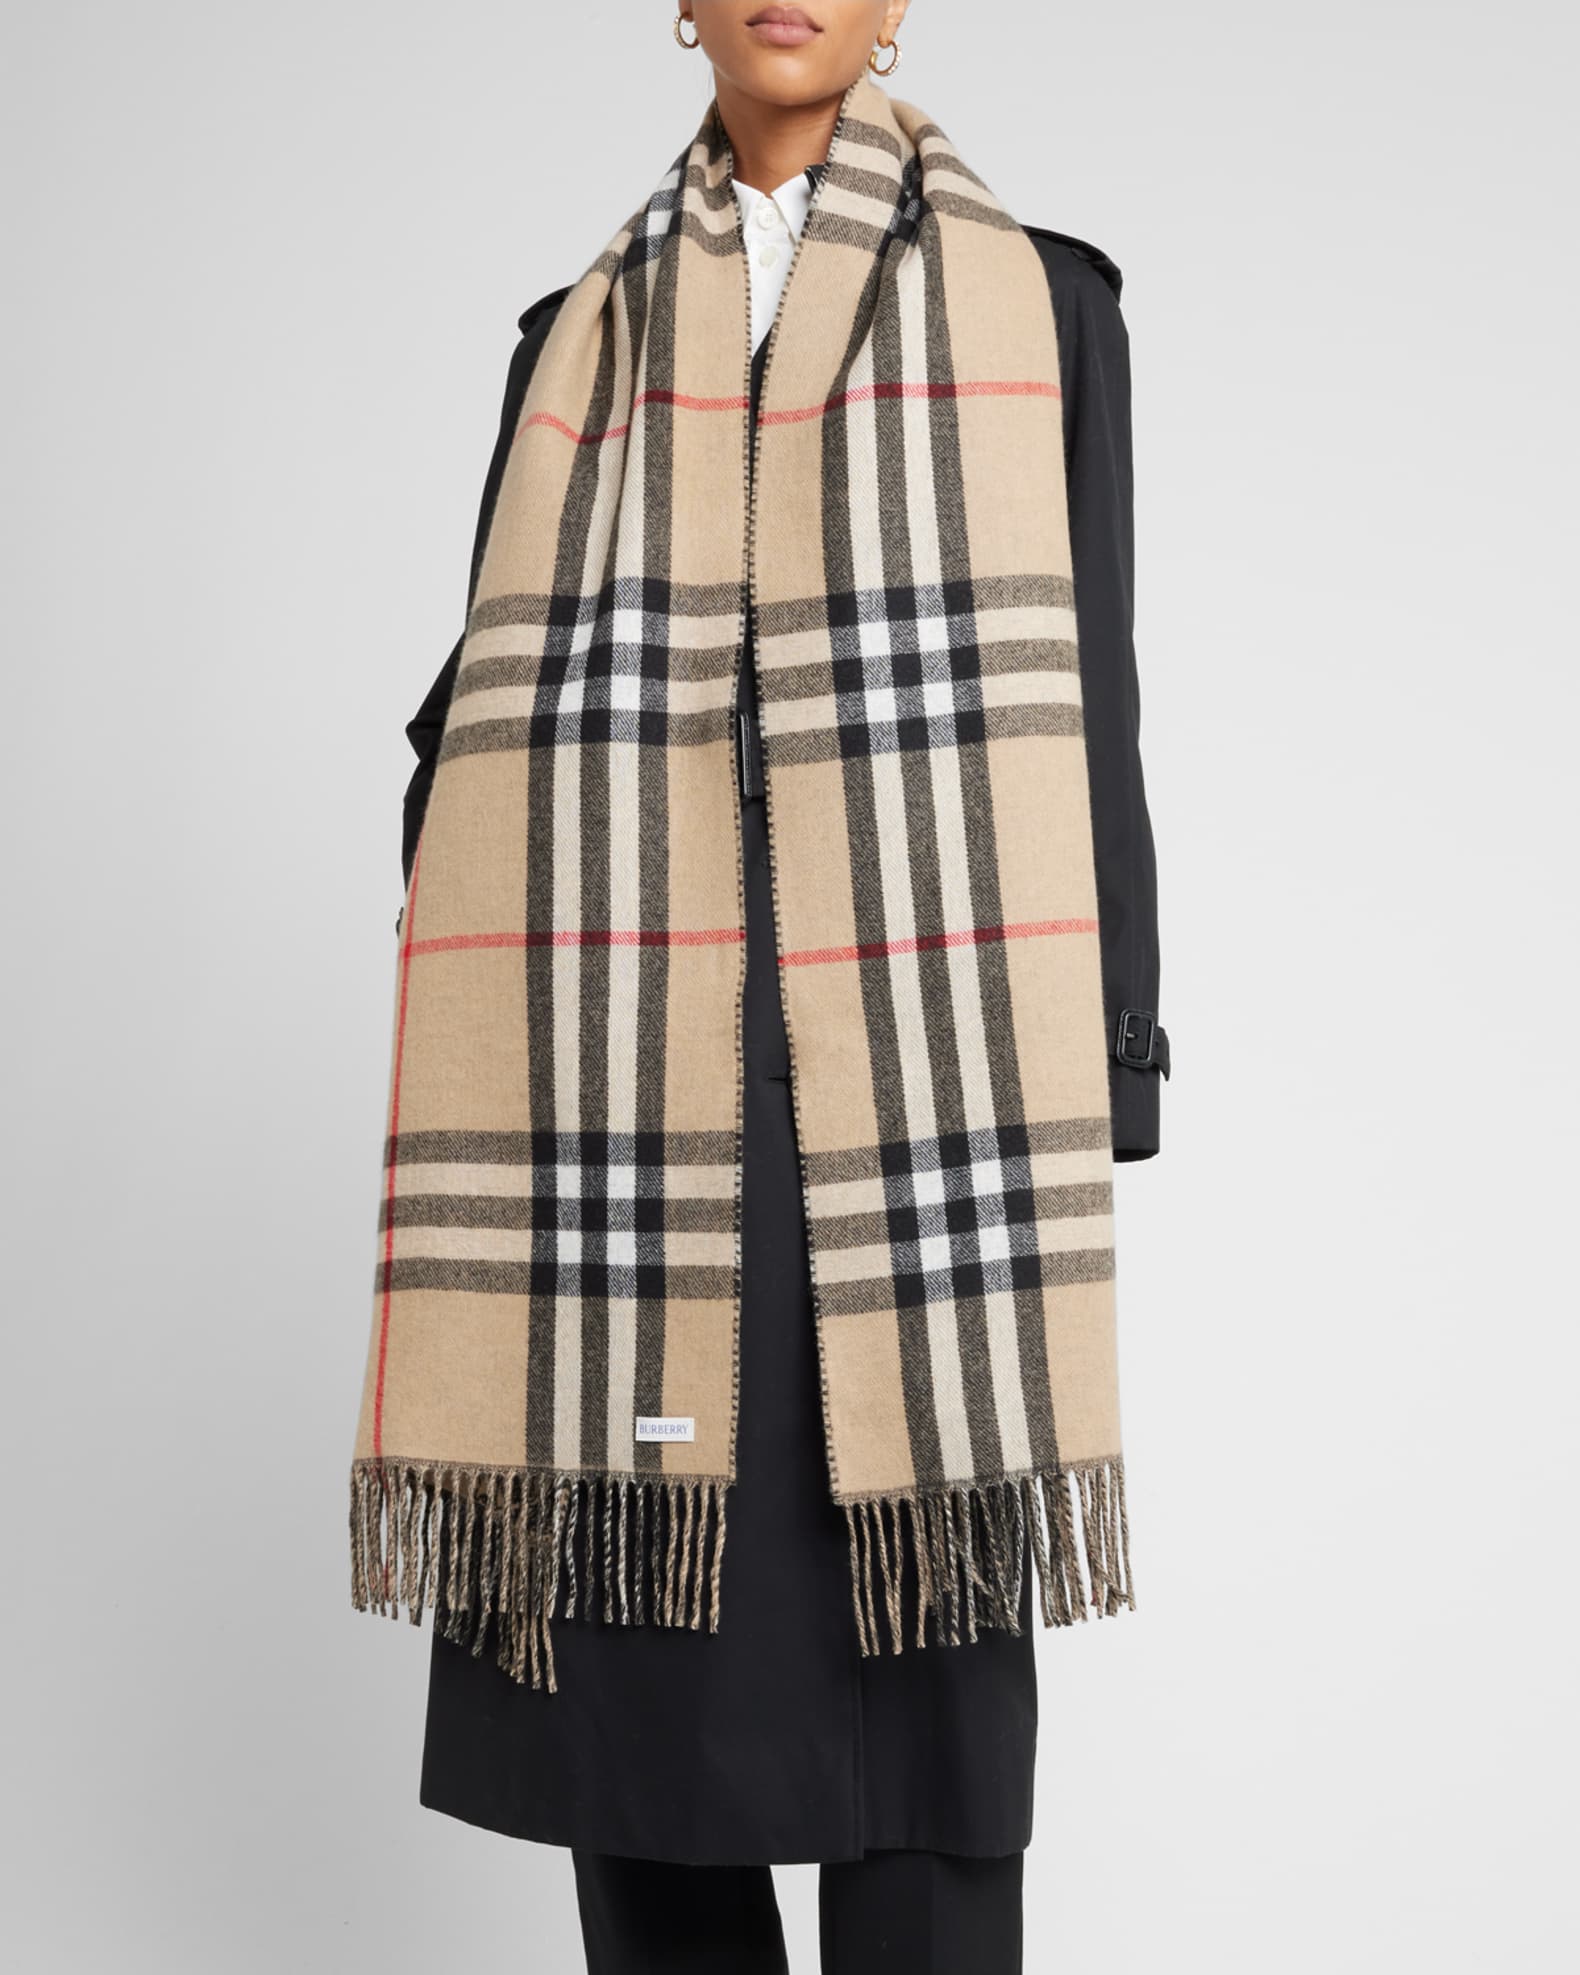 Burberry, Accessories, Burberry Giant Check Print Wool Silk Scarf